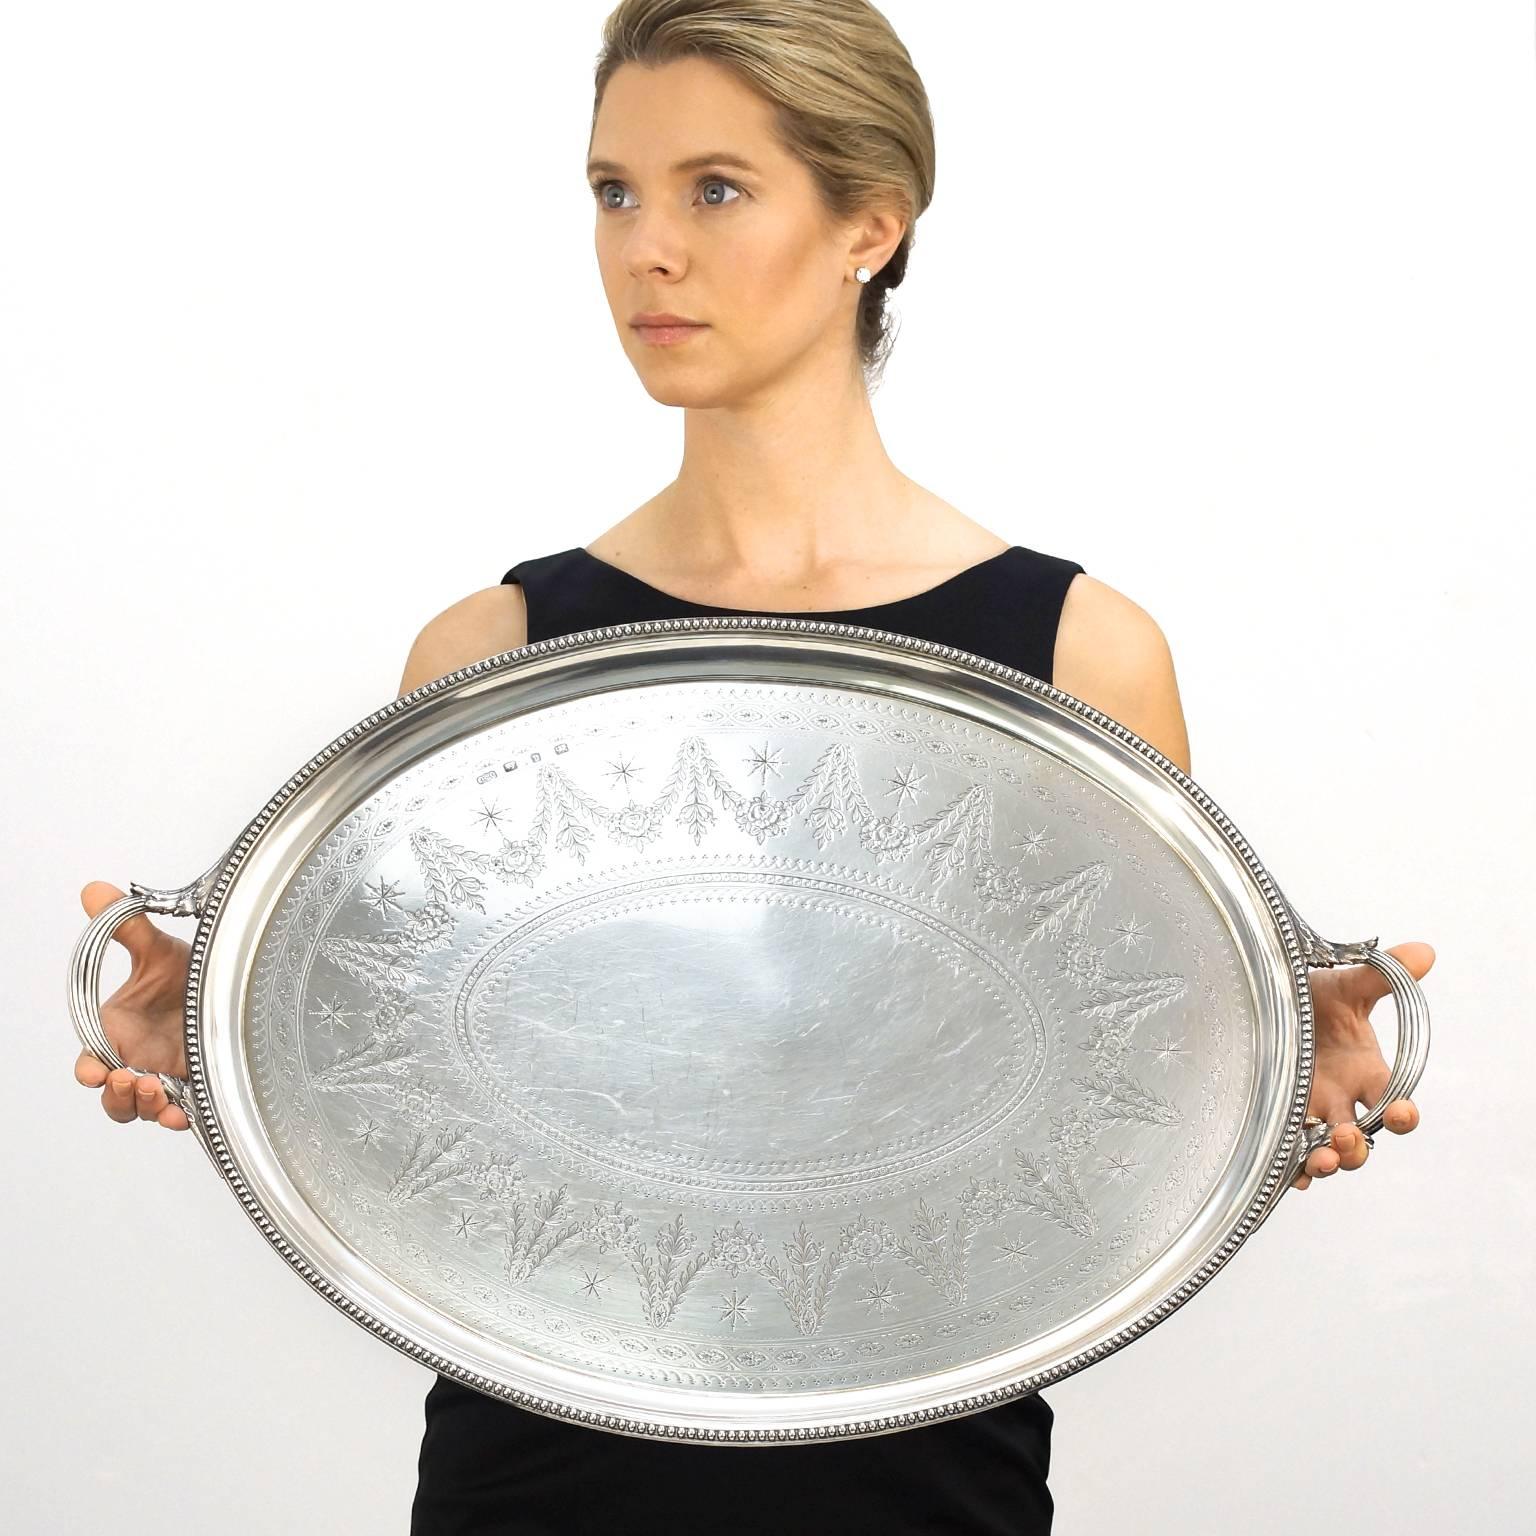 Circa 1876, sterling, by Elkington & Co. Ltd., Birmingham, England. This elegant tray by the renowned silversmithy Elkington & Co. is adorned with gorgeous hand-engraving. Its swagged pattern, delineated by stars, is framed with a bold, beaded edge.